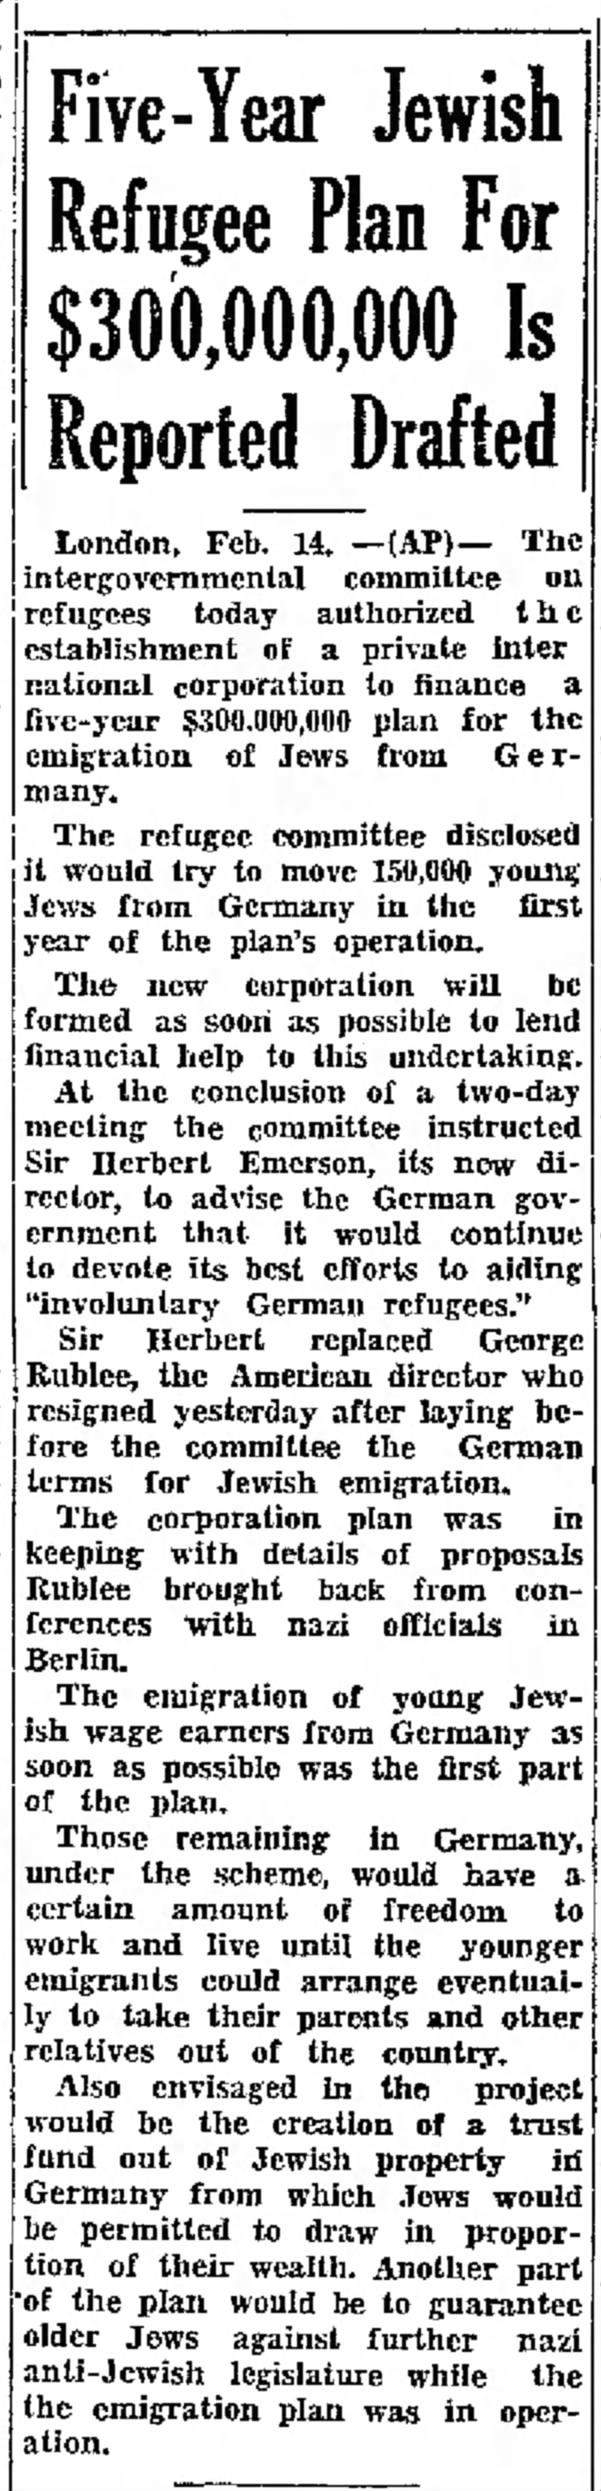 Five-Year Jewish Refugee Plan for $300,000,000 Is Reported Drafted